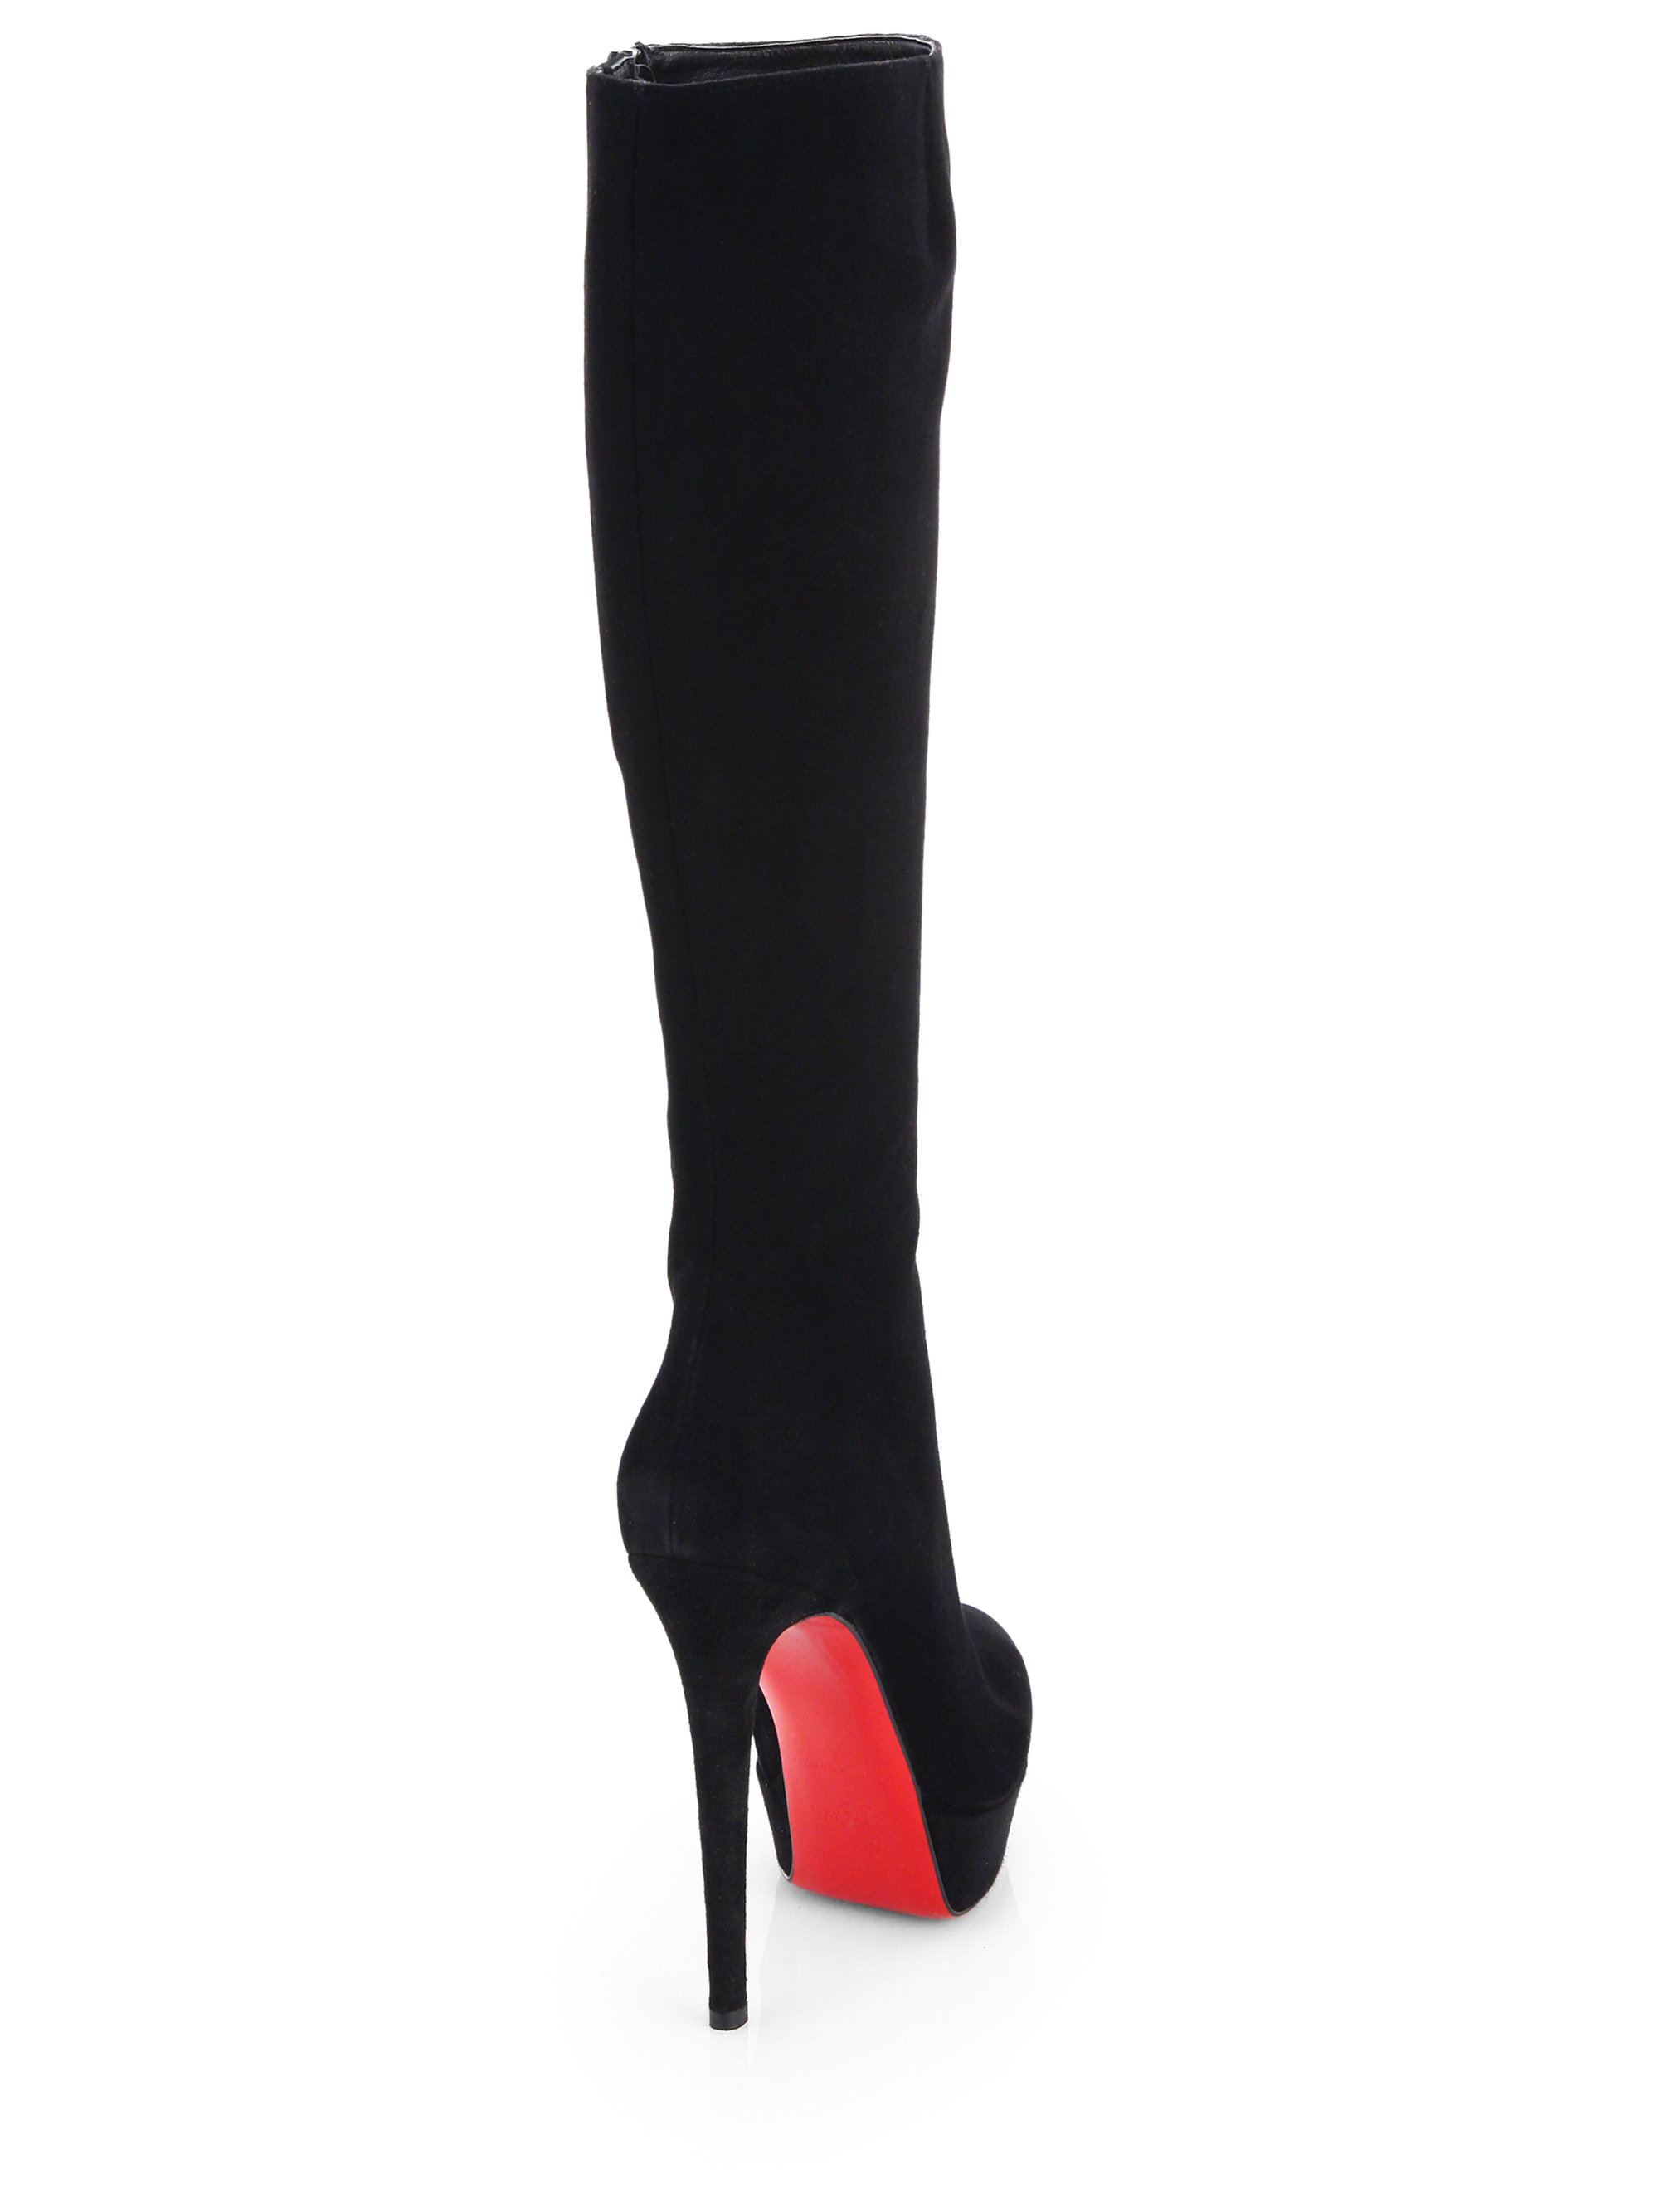 Christian Bianca Suede Knee-High Boots in Black | Lyst